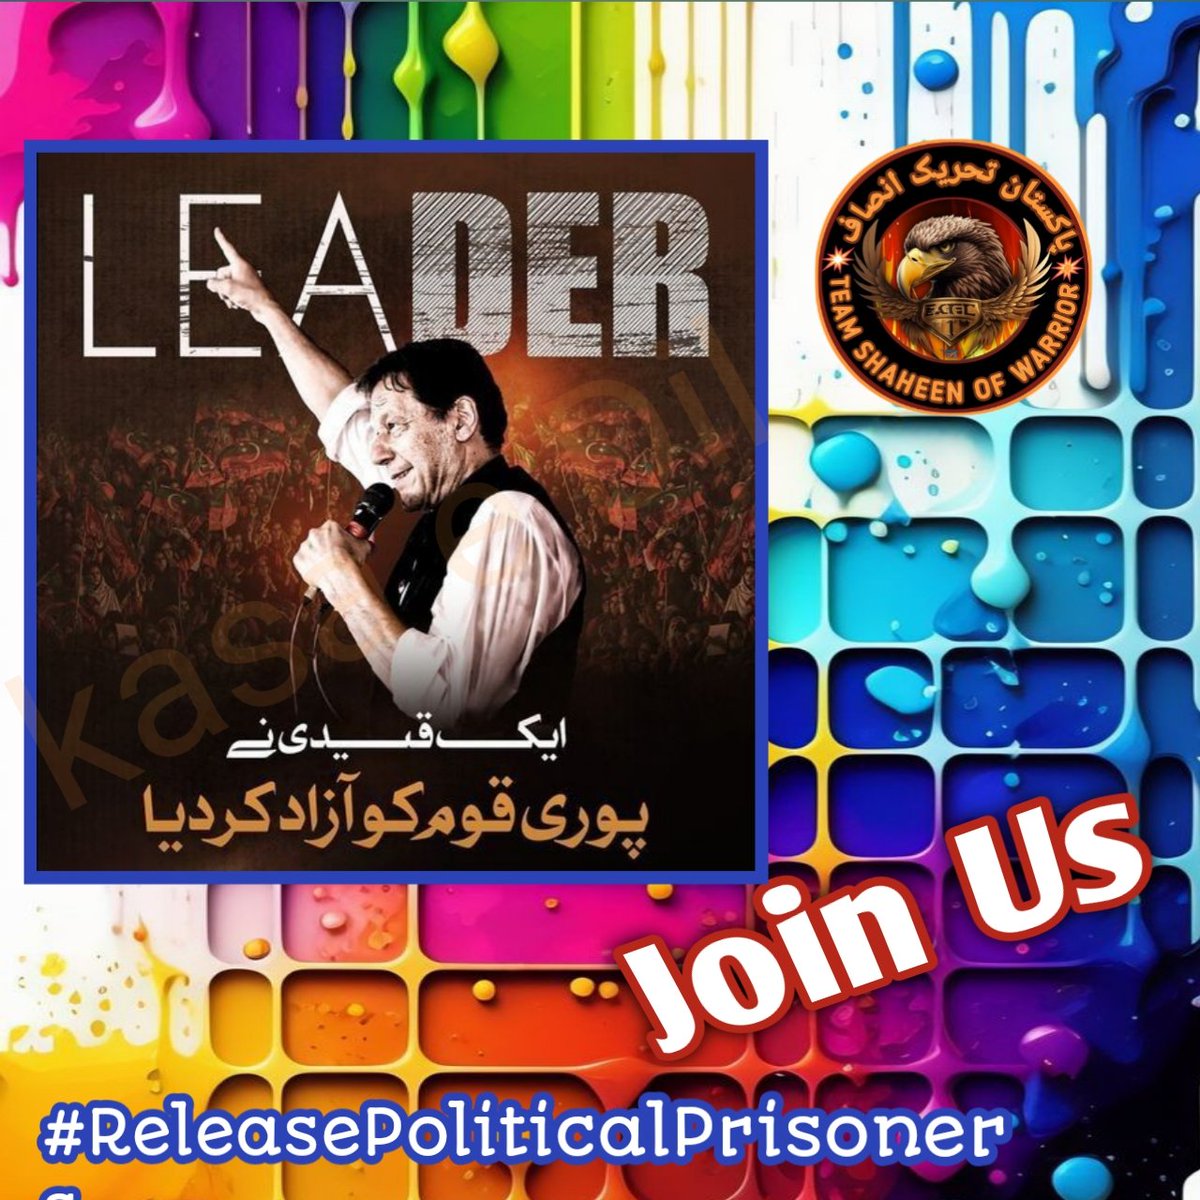 A true democracy doesn't imprison its dissenters. Demand their freedom now. #ReleasePoliticalPrisoners
@TM__SOW